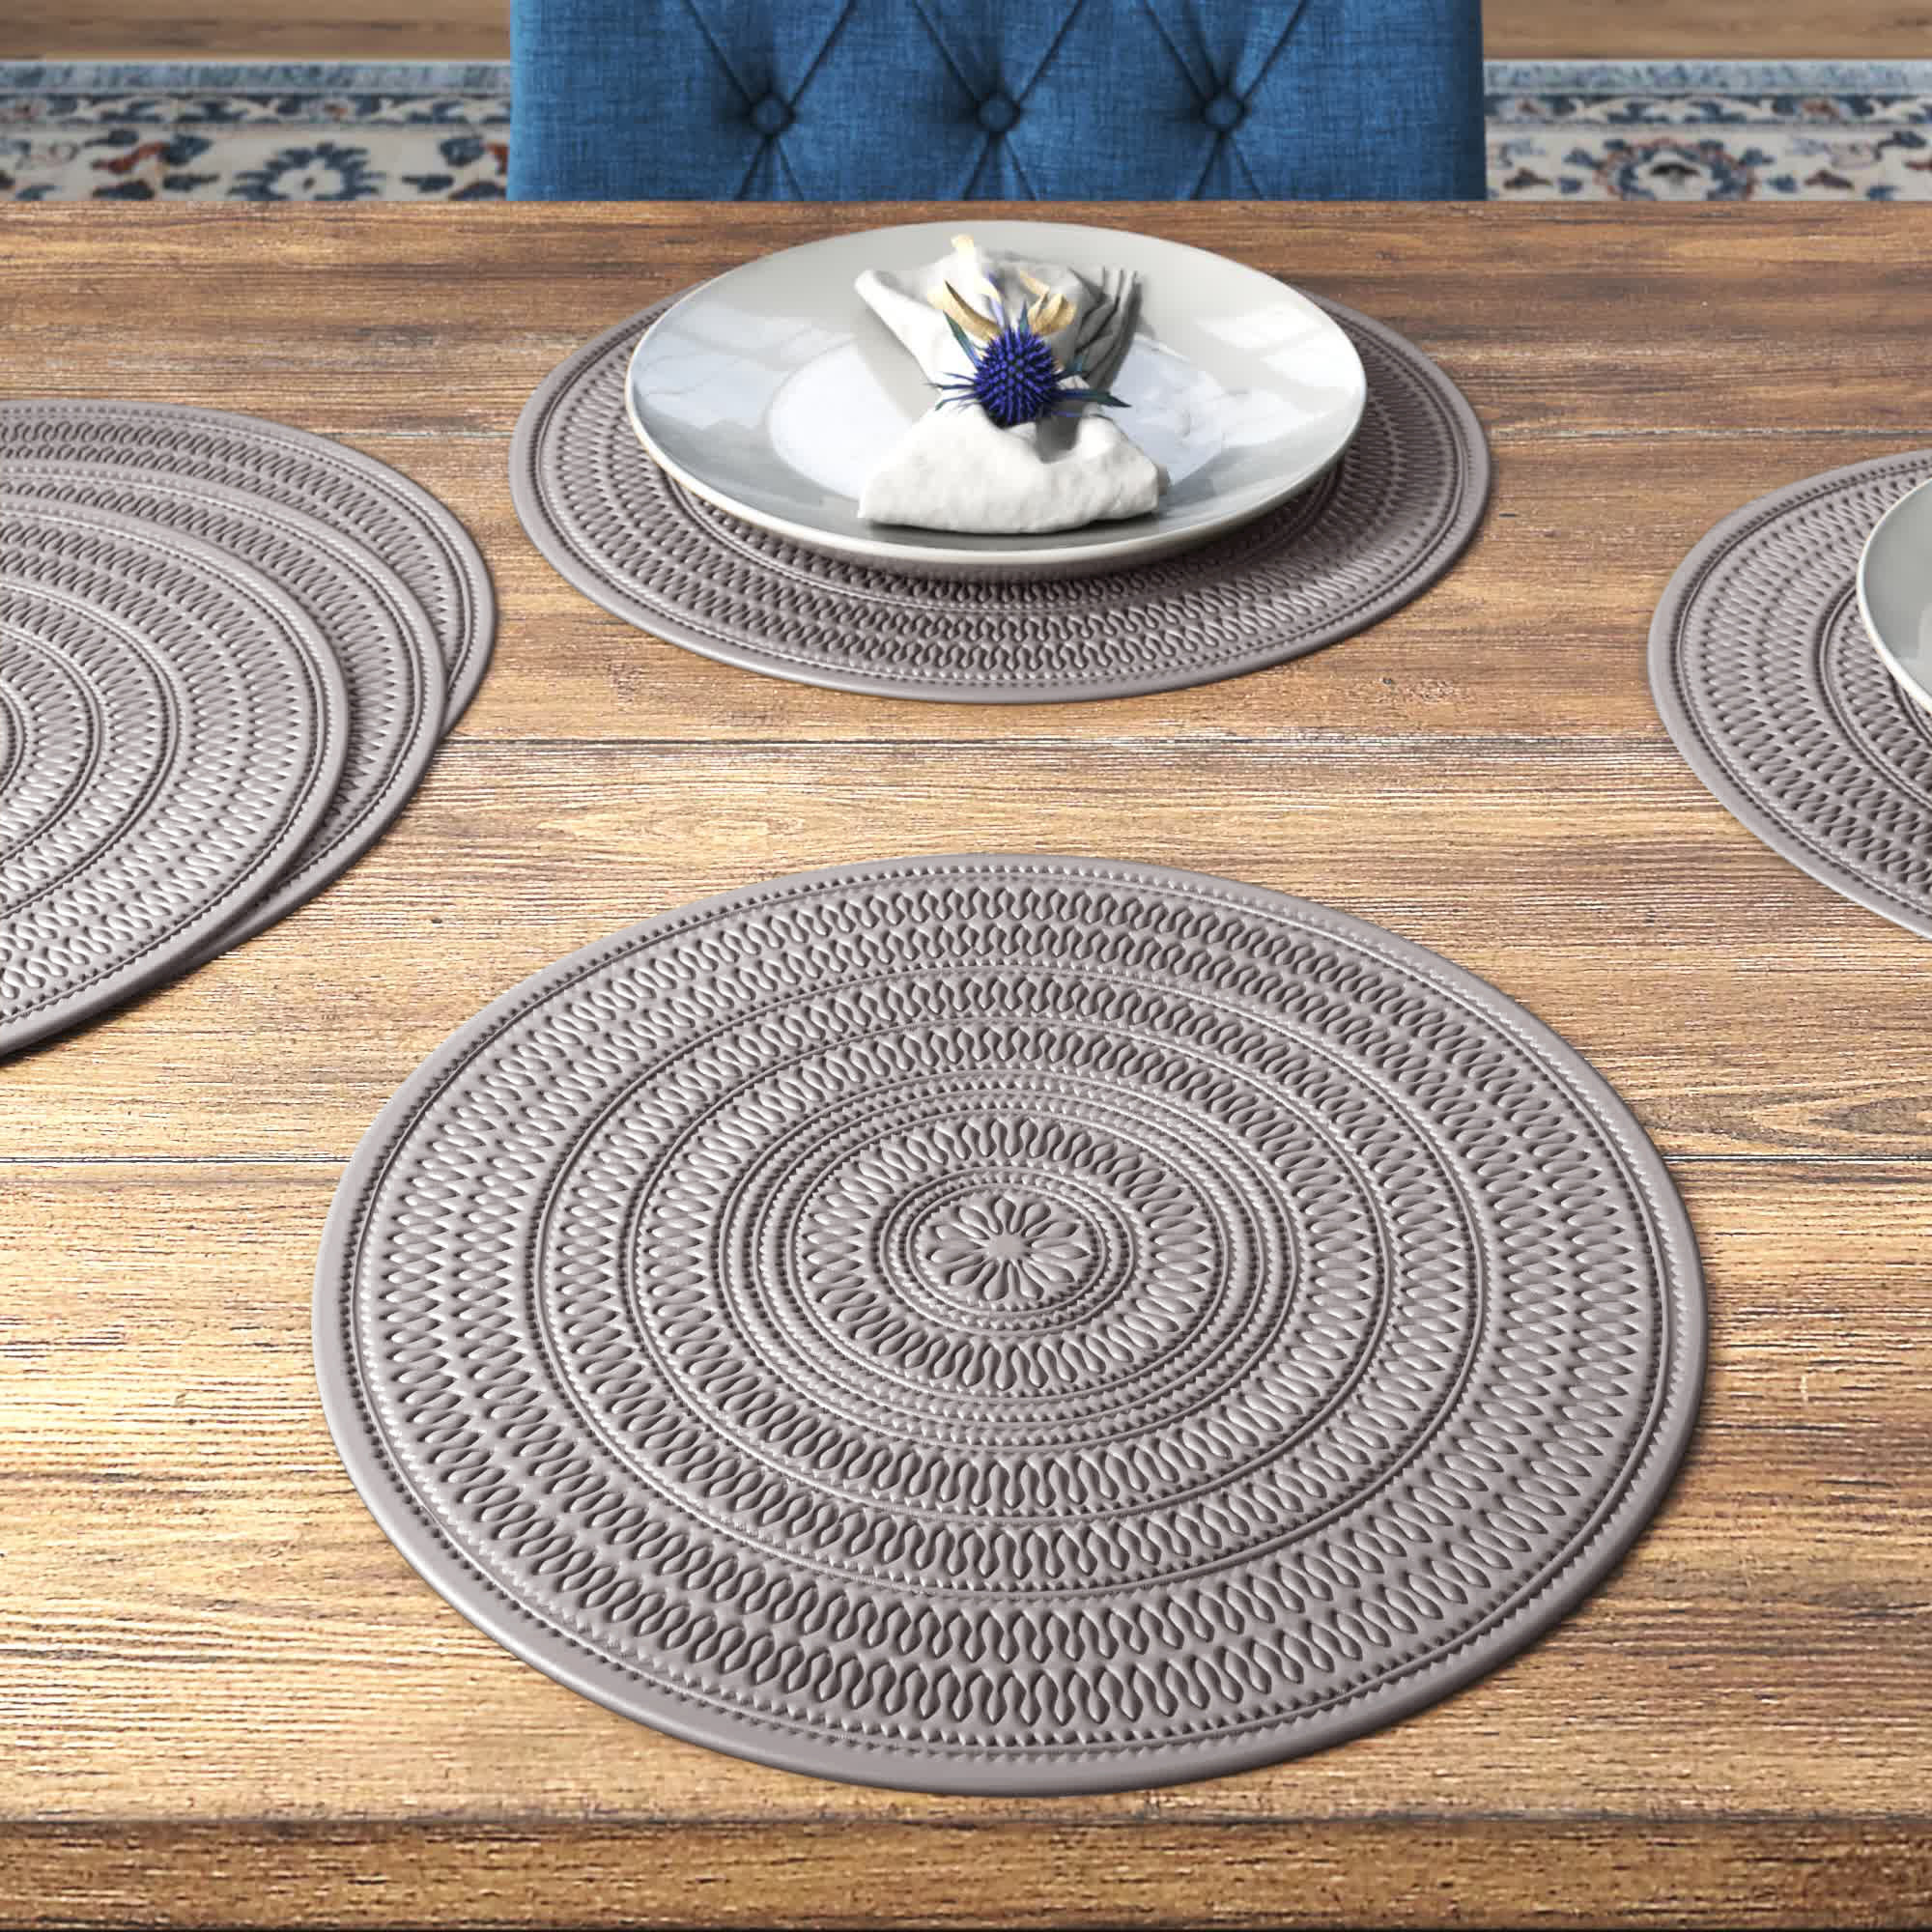 6 pcs 13 Round Glittered Faux Leather Placemats